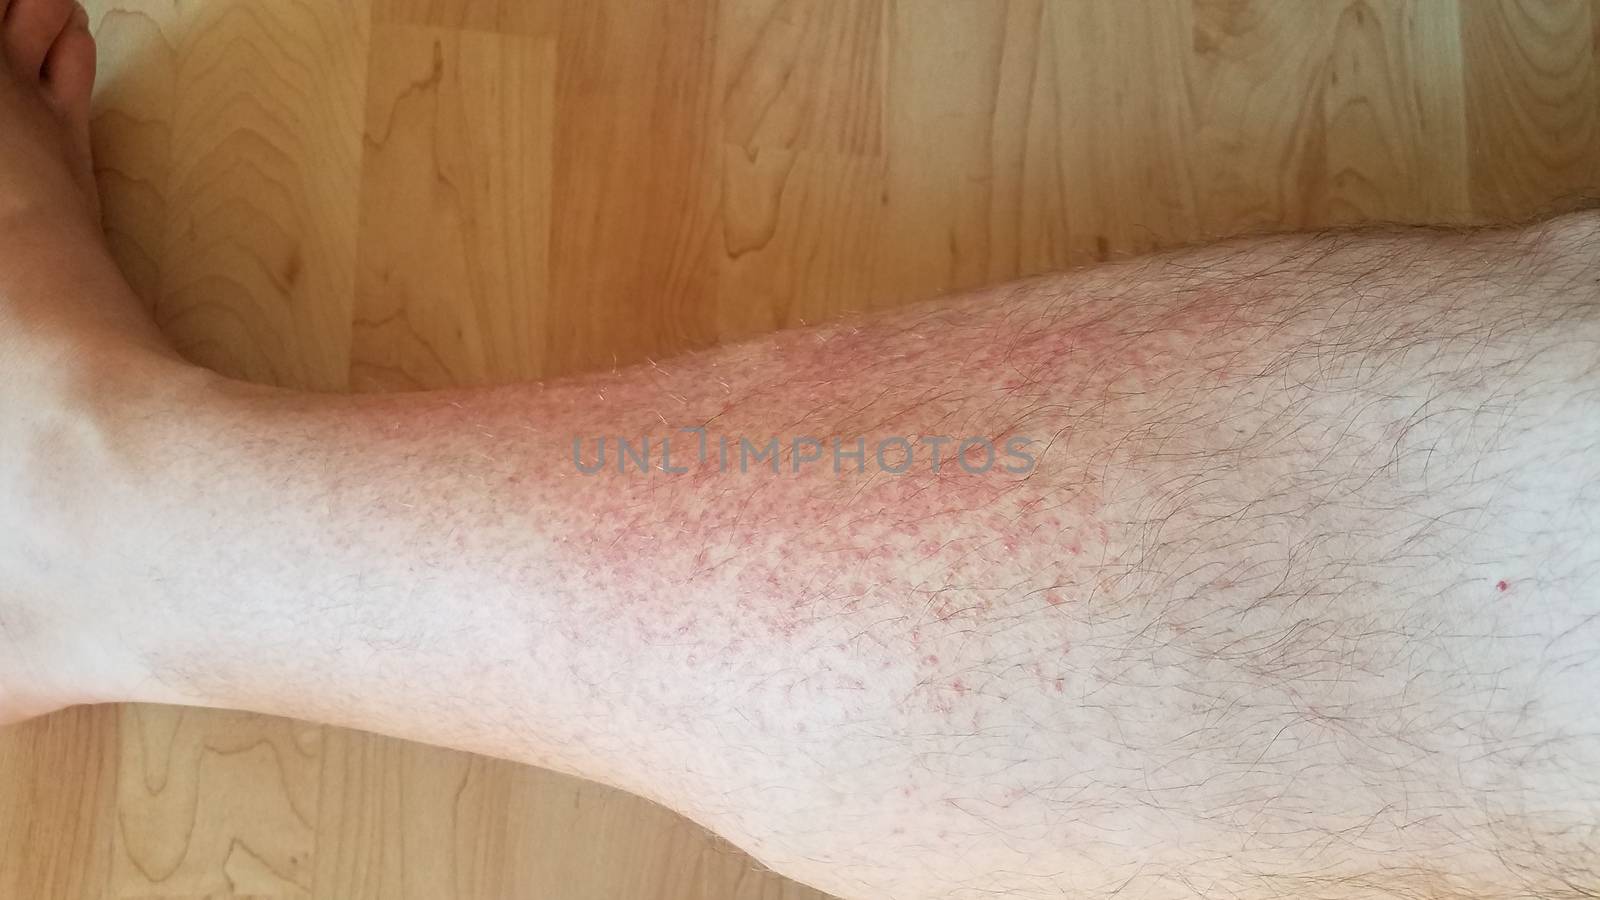 red inflammation dots or spots on man's leg with hair